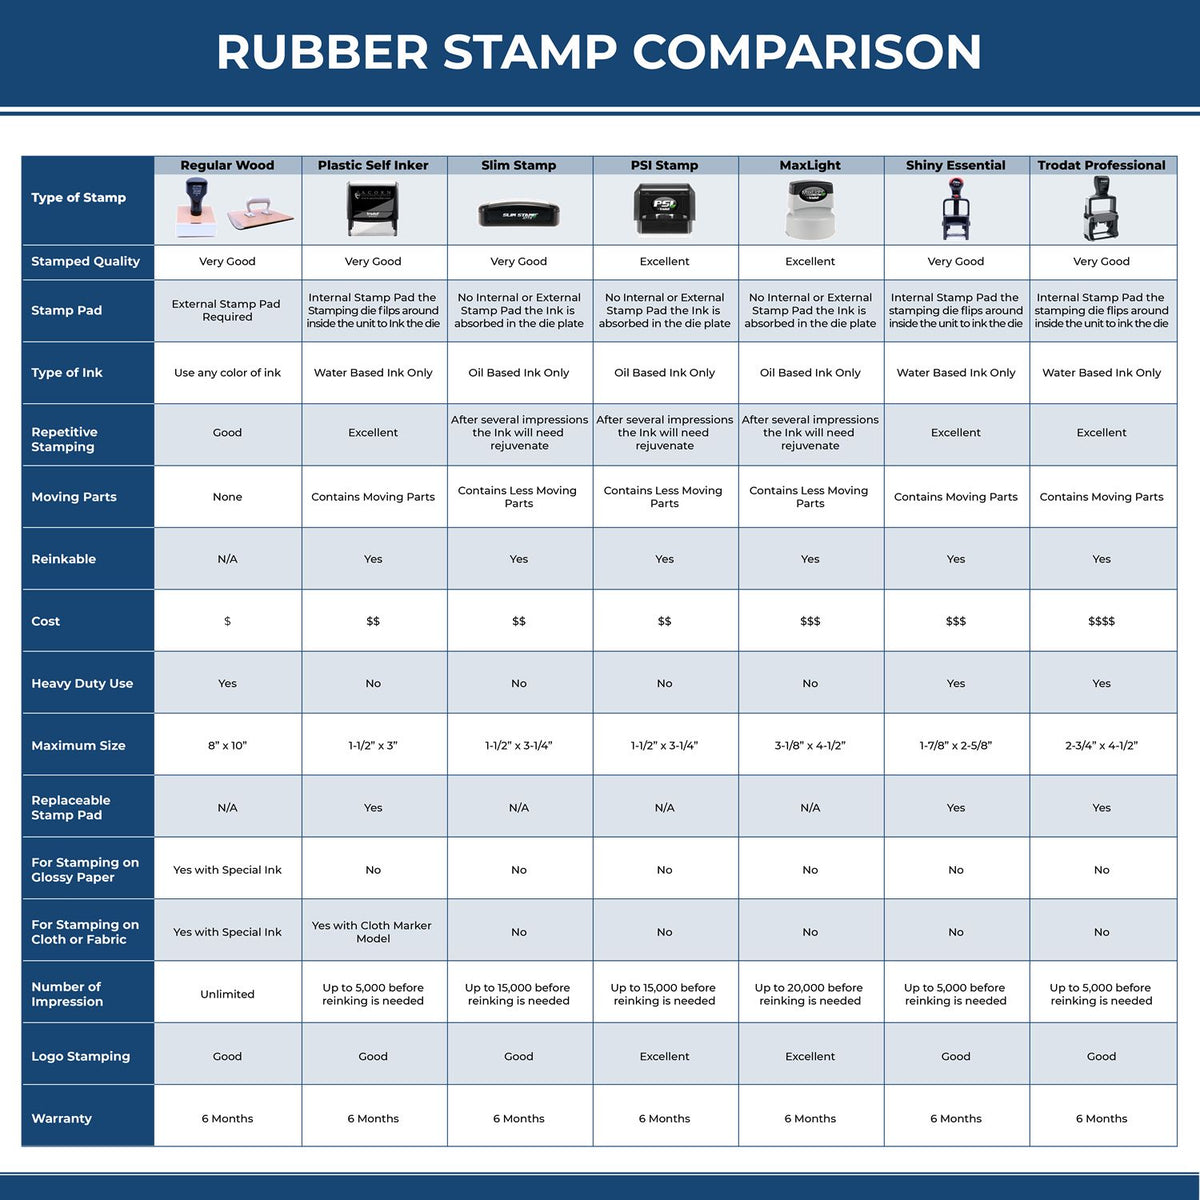 Large Self Inking Certified Copy Stamp 4604S Rubber Stamp Comparison